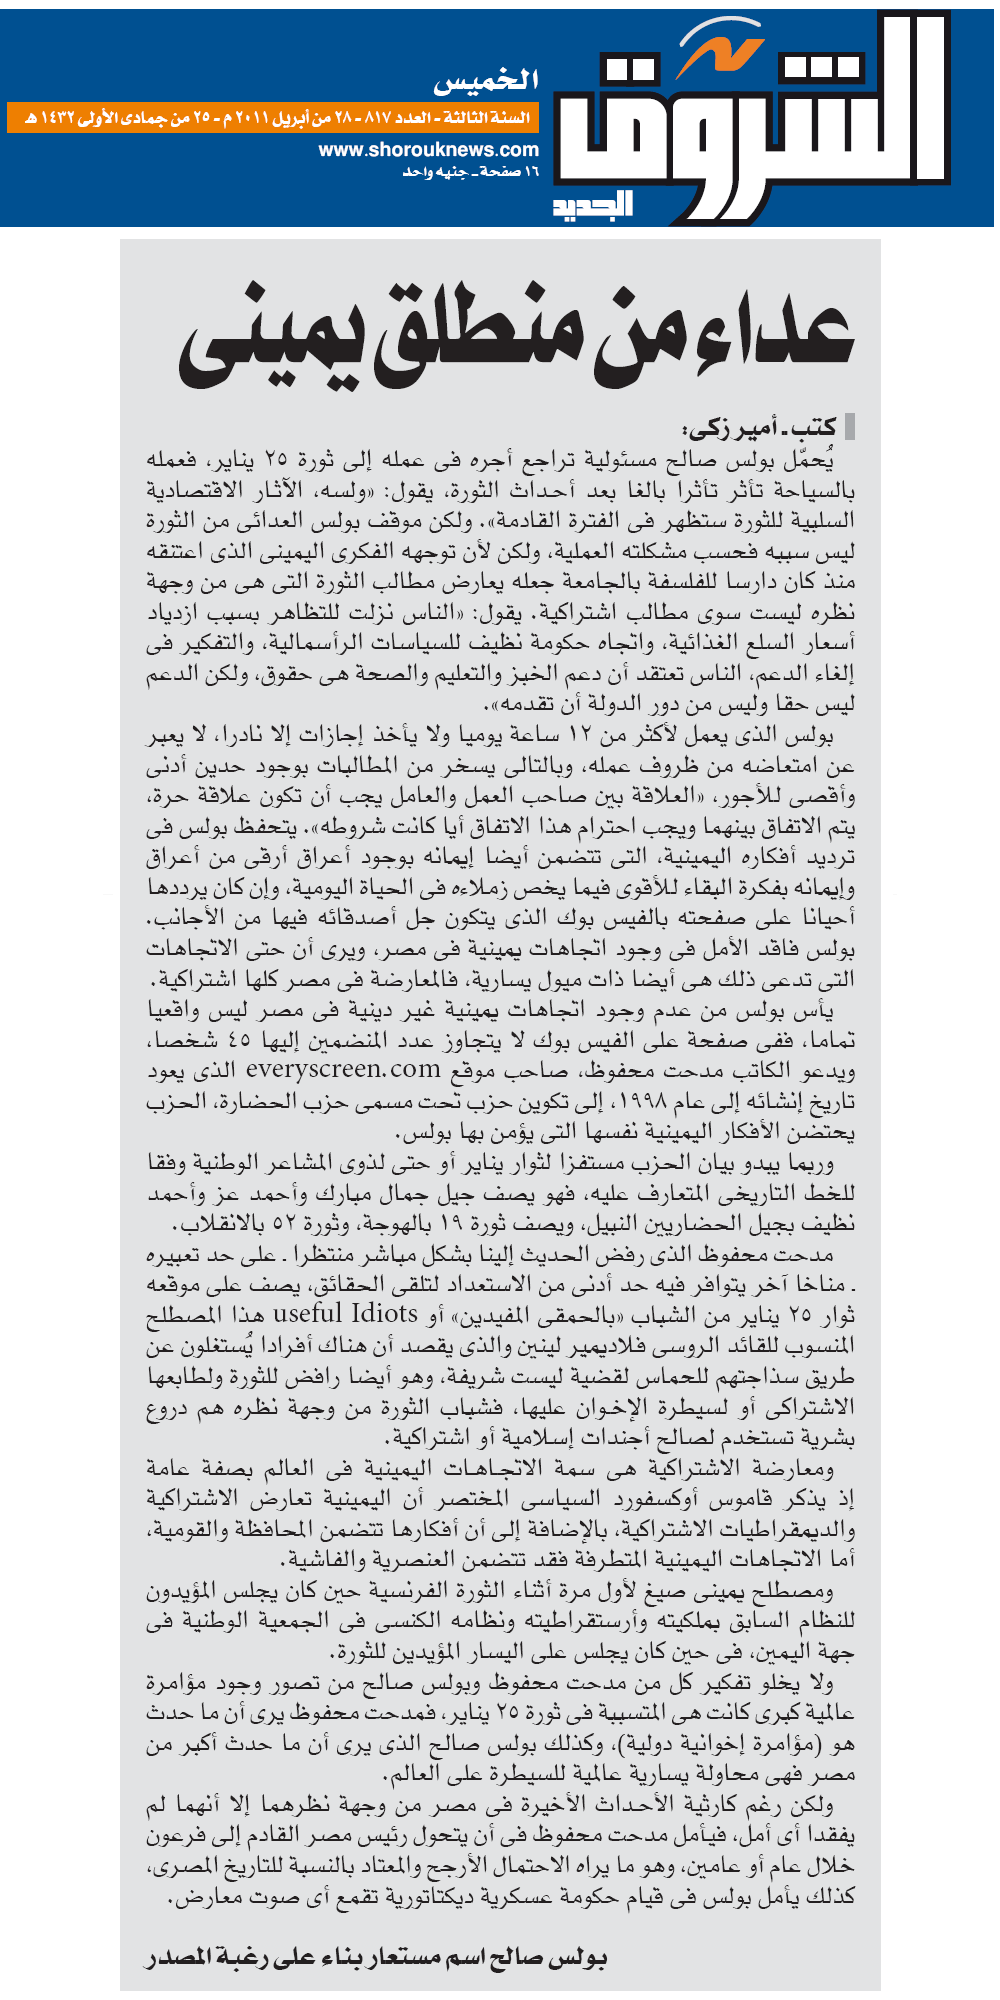 Egyptian right wing, represented by Medhat Mahfouz and someone else, as reported on page 14 of the Egyptian daily A-Shorouq, April 28, 2011.